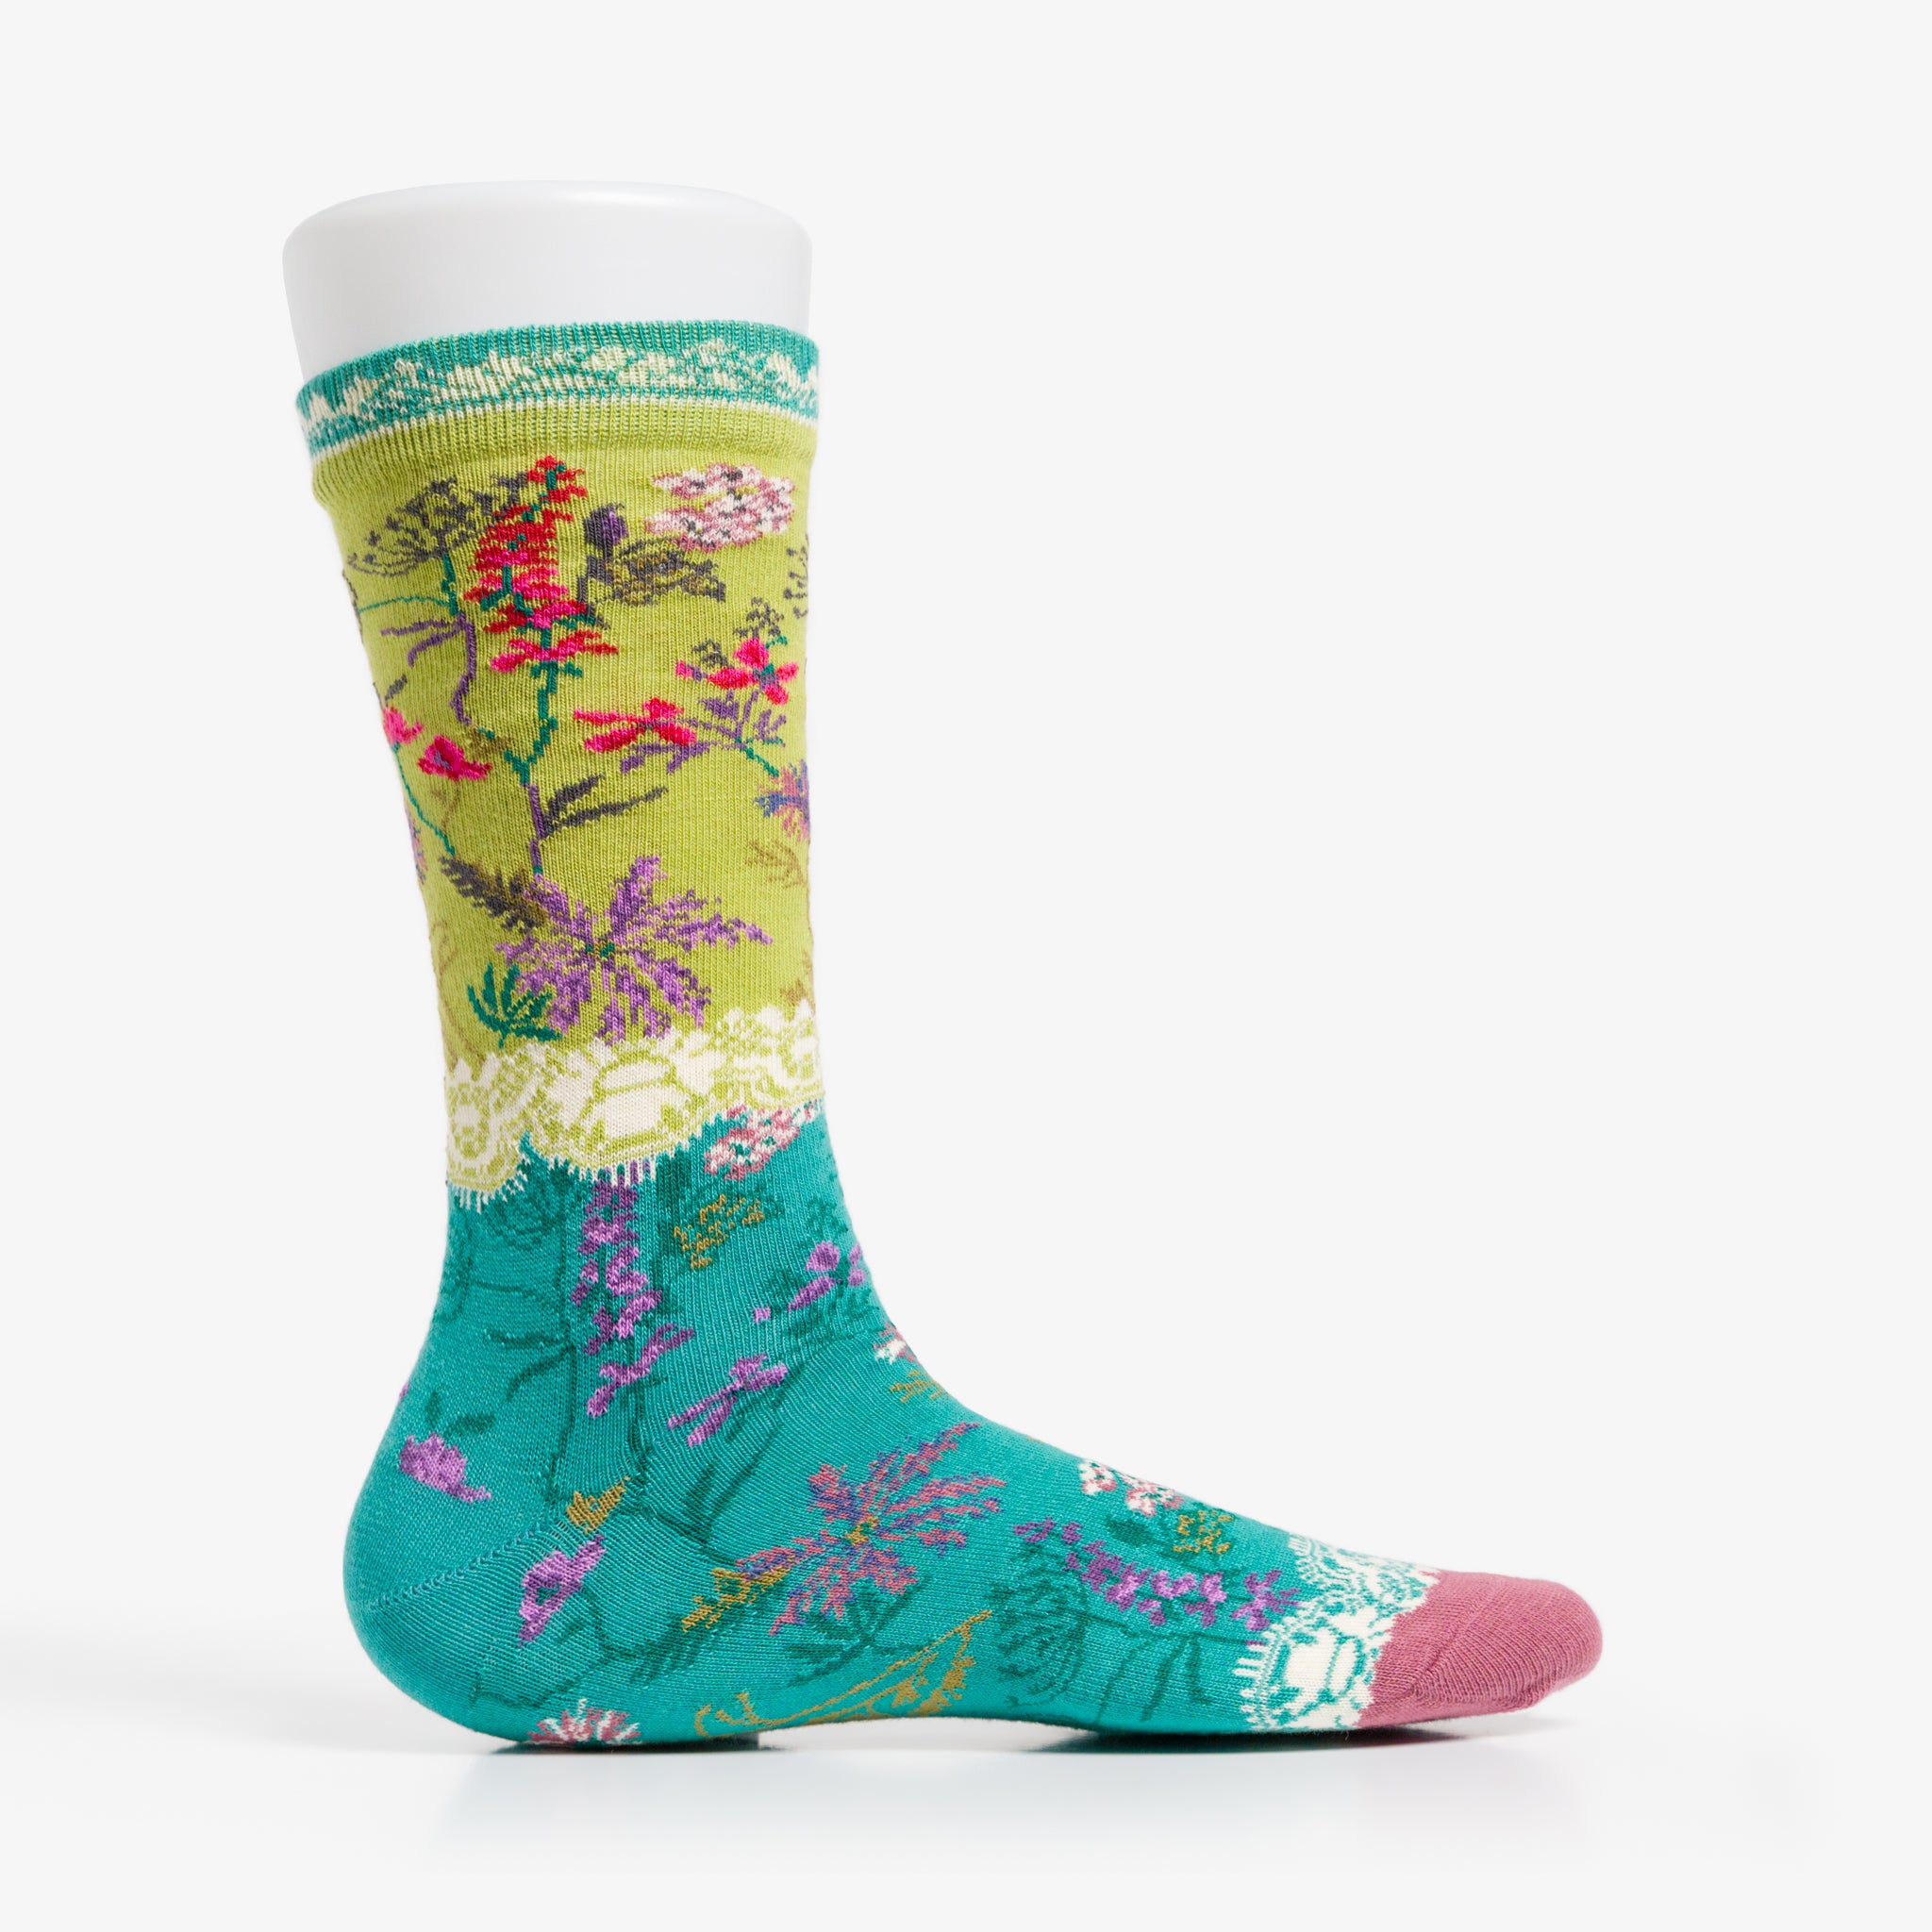 Garden Lace Socks from Ozone